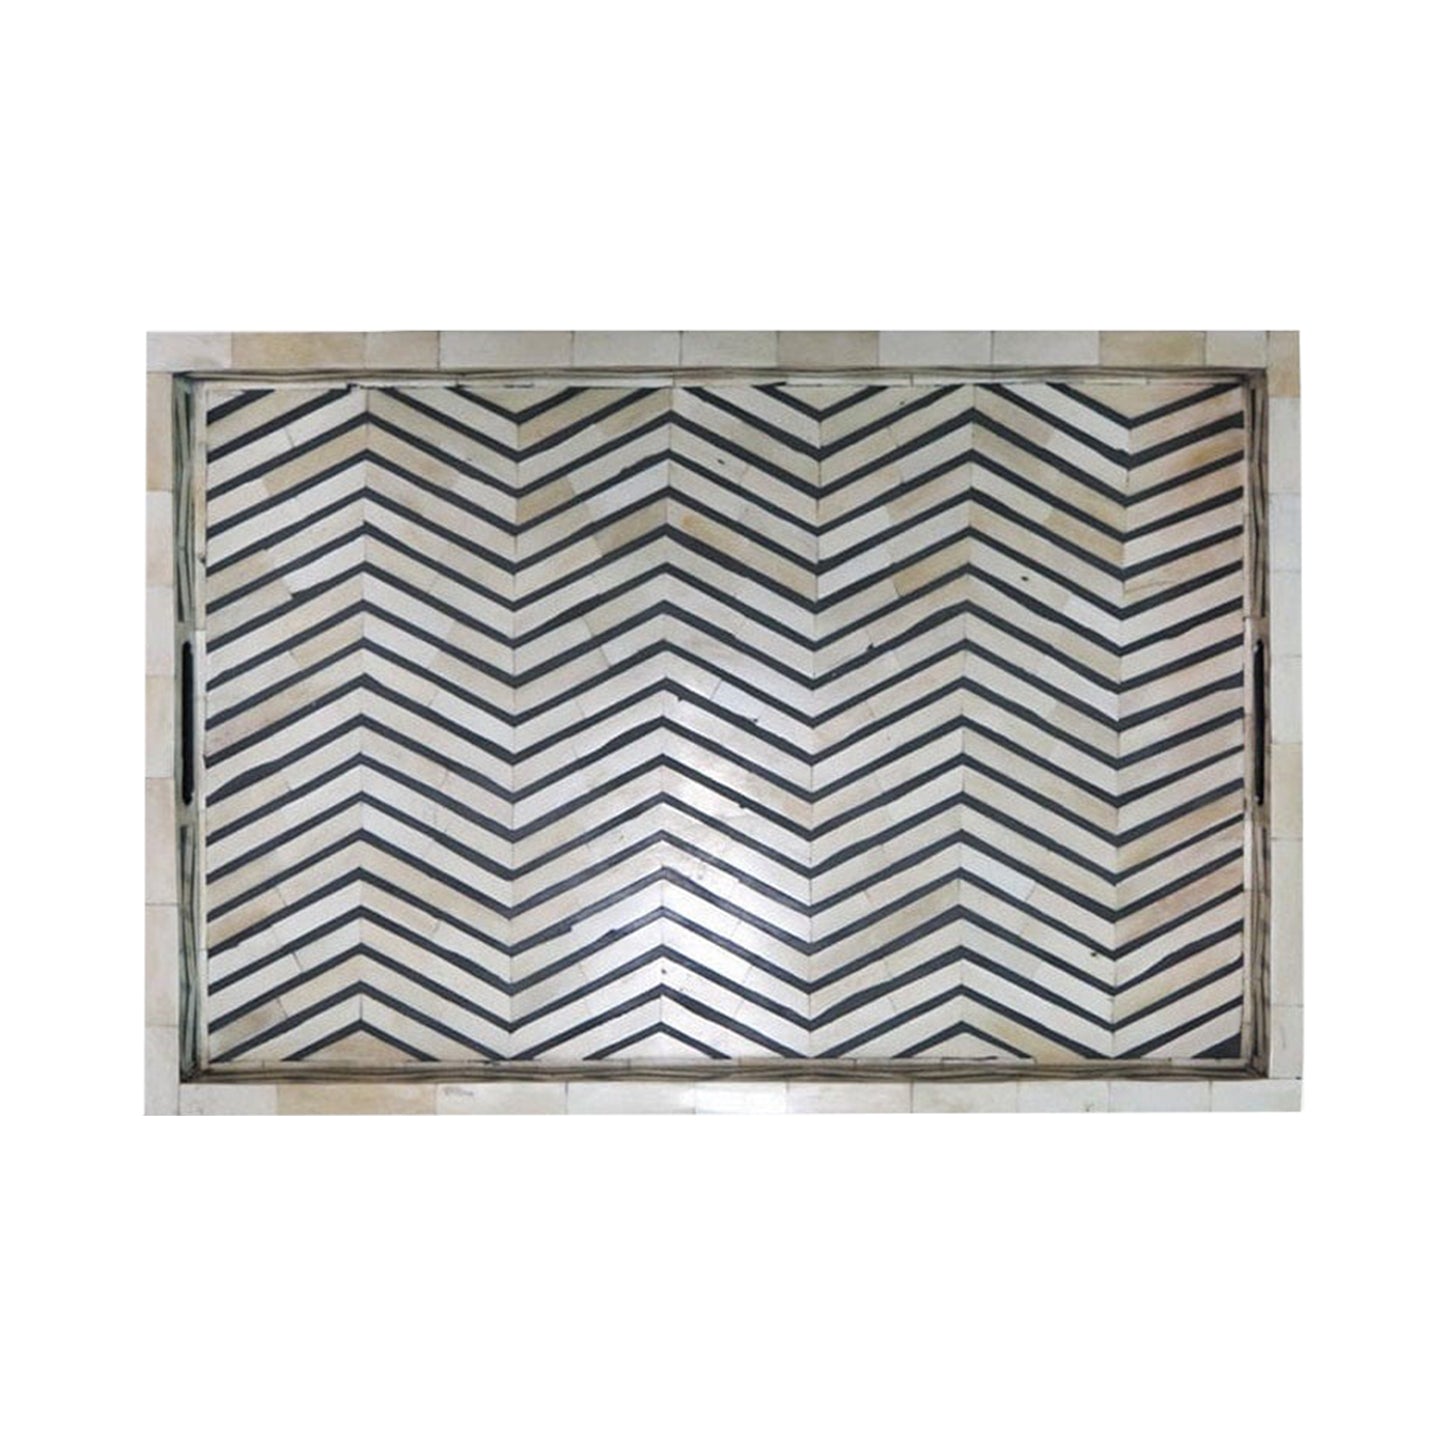 Customized Handmade Bone Inlay Chevron Pattern Serving Tray Best Gift For Any Occasion